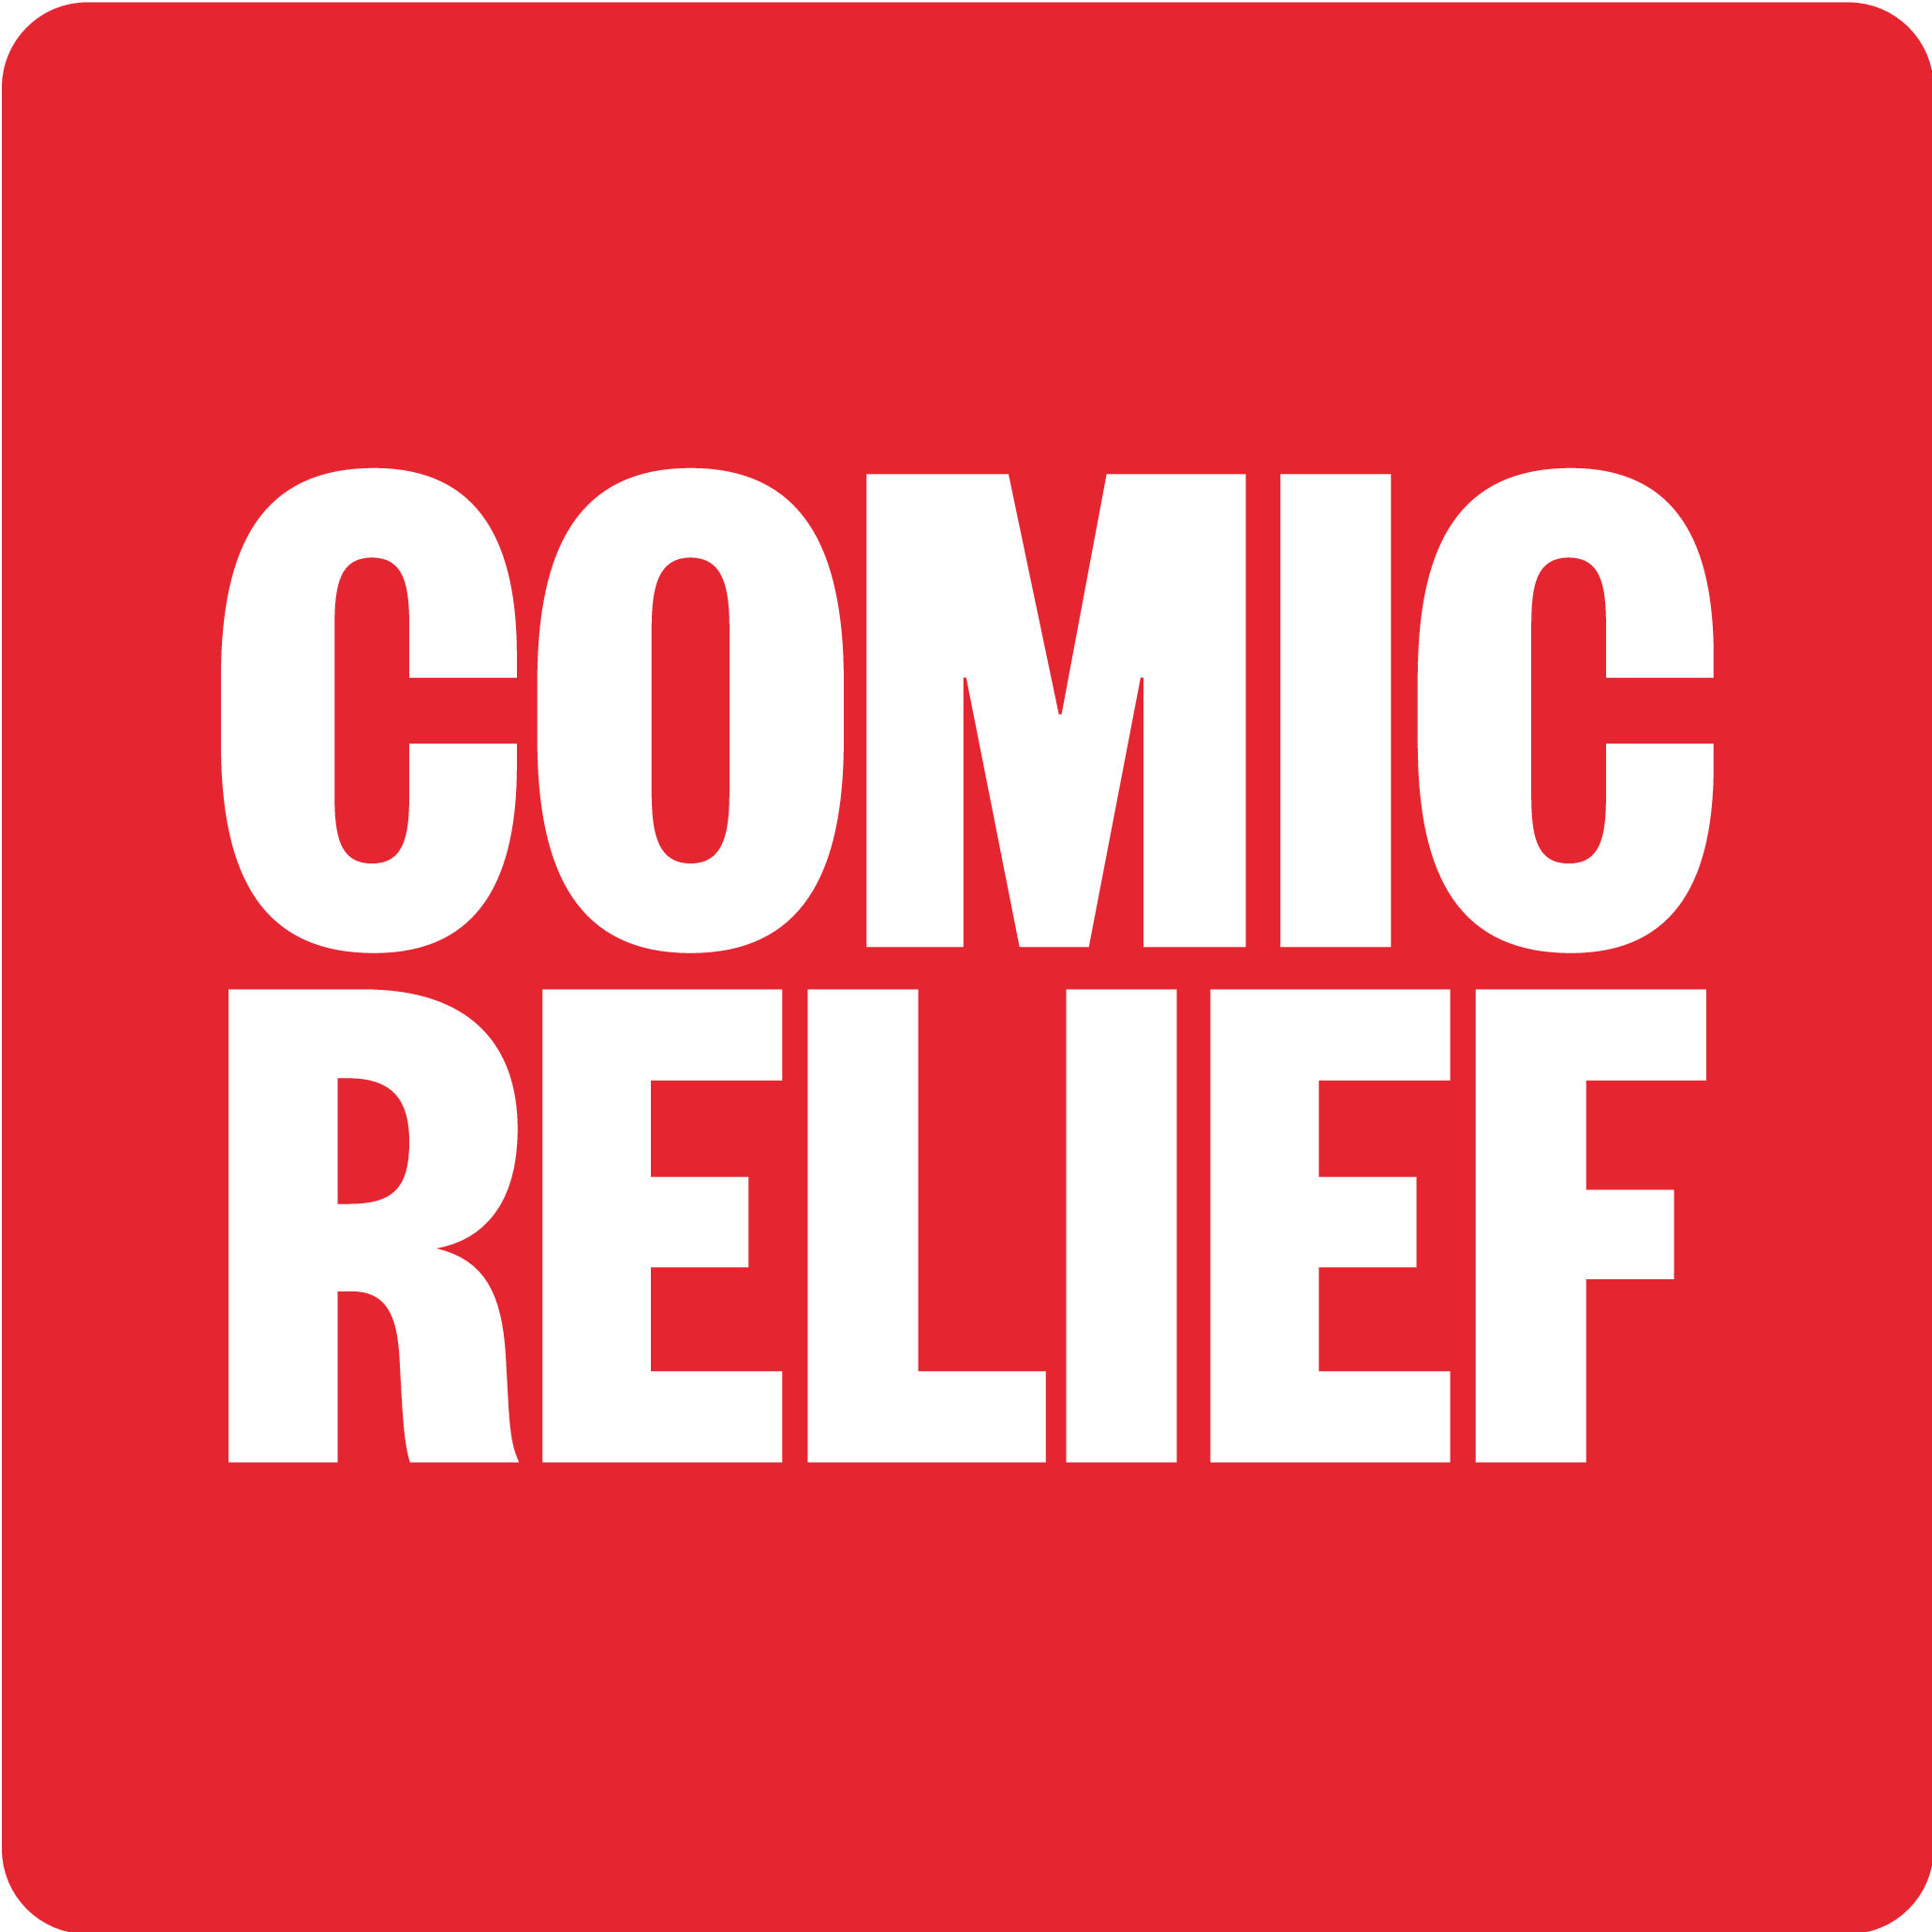 A just world free from poverty | Comic Relief